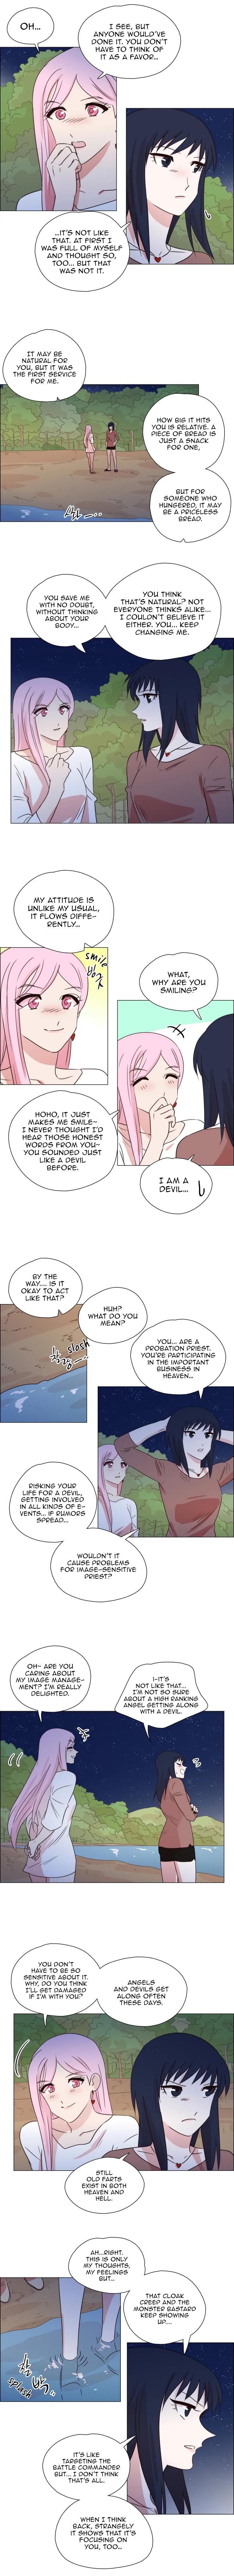 Miss Angel And Miss Devil Chapter 277: Ep 30 - Hold Your Hand In Mine (17) page 3 - Mangakakalot